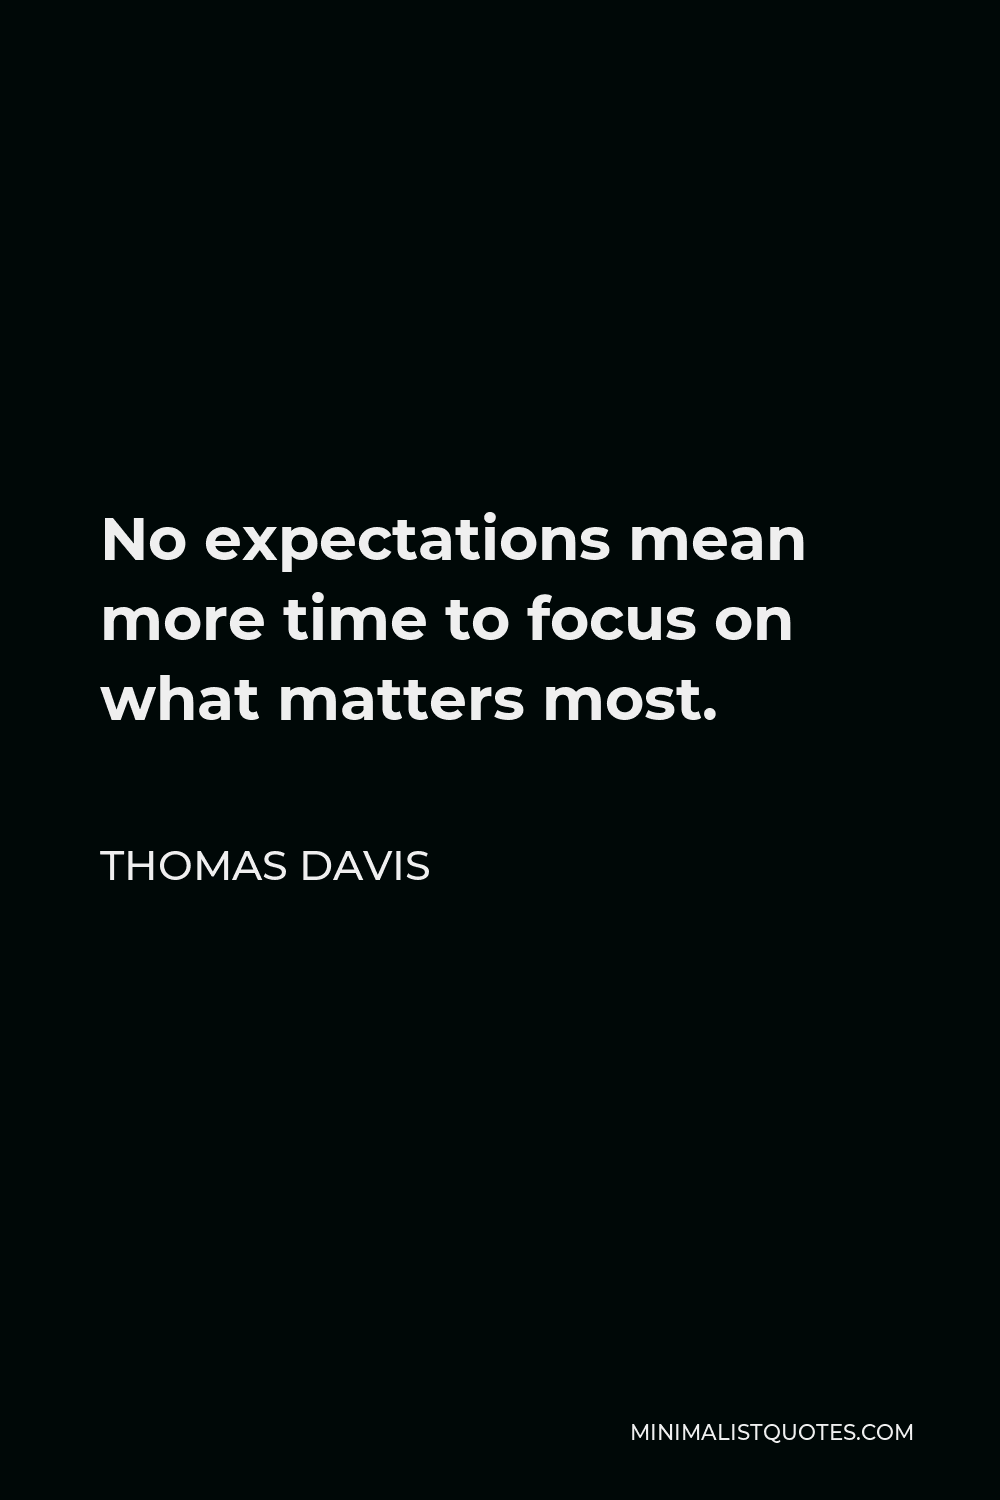 Thomas Davis Quote - No expectations mean more time to focus on what matters most.